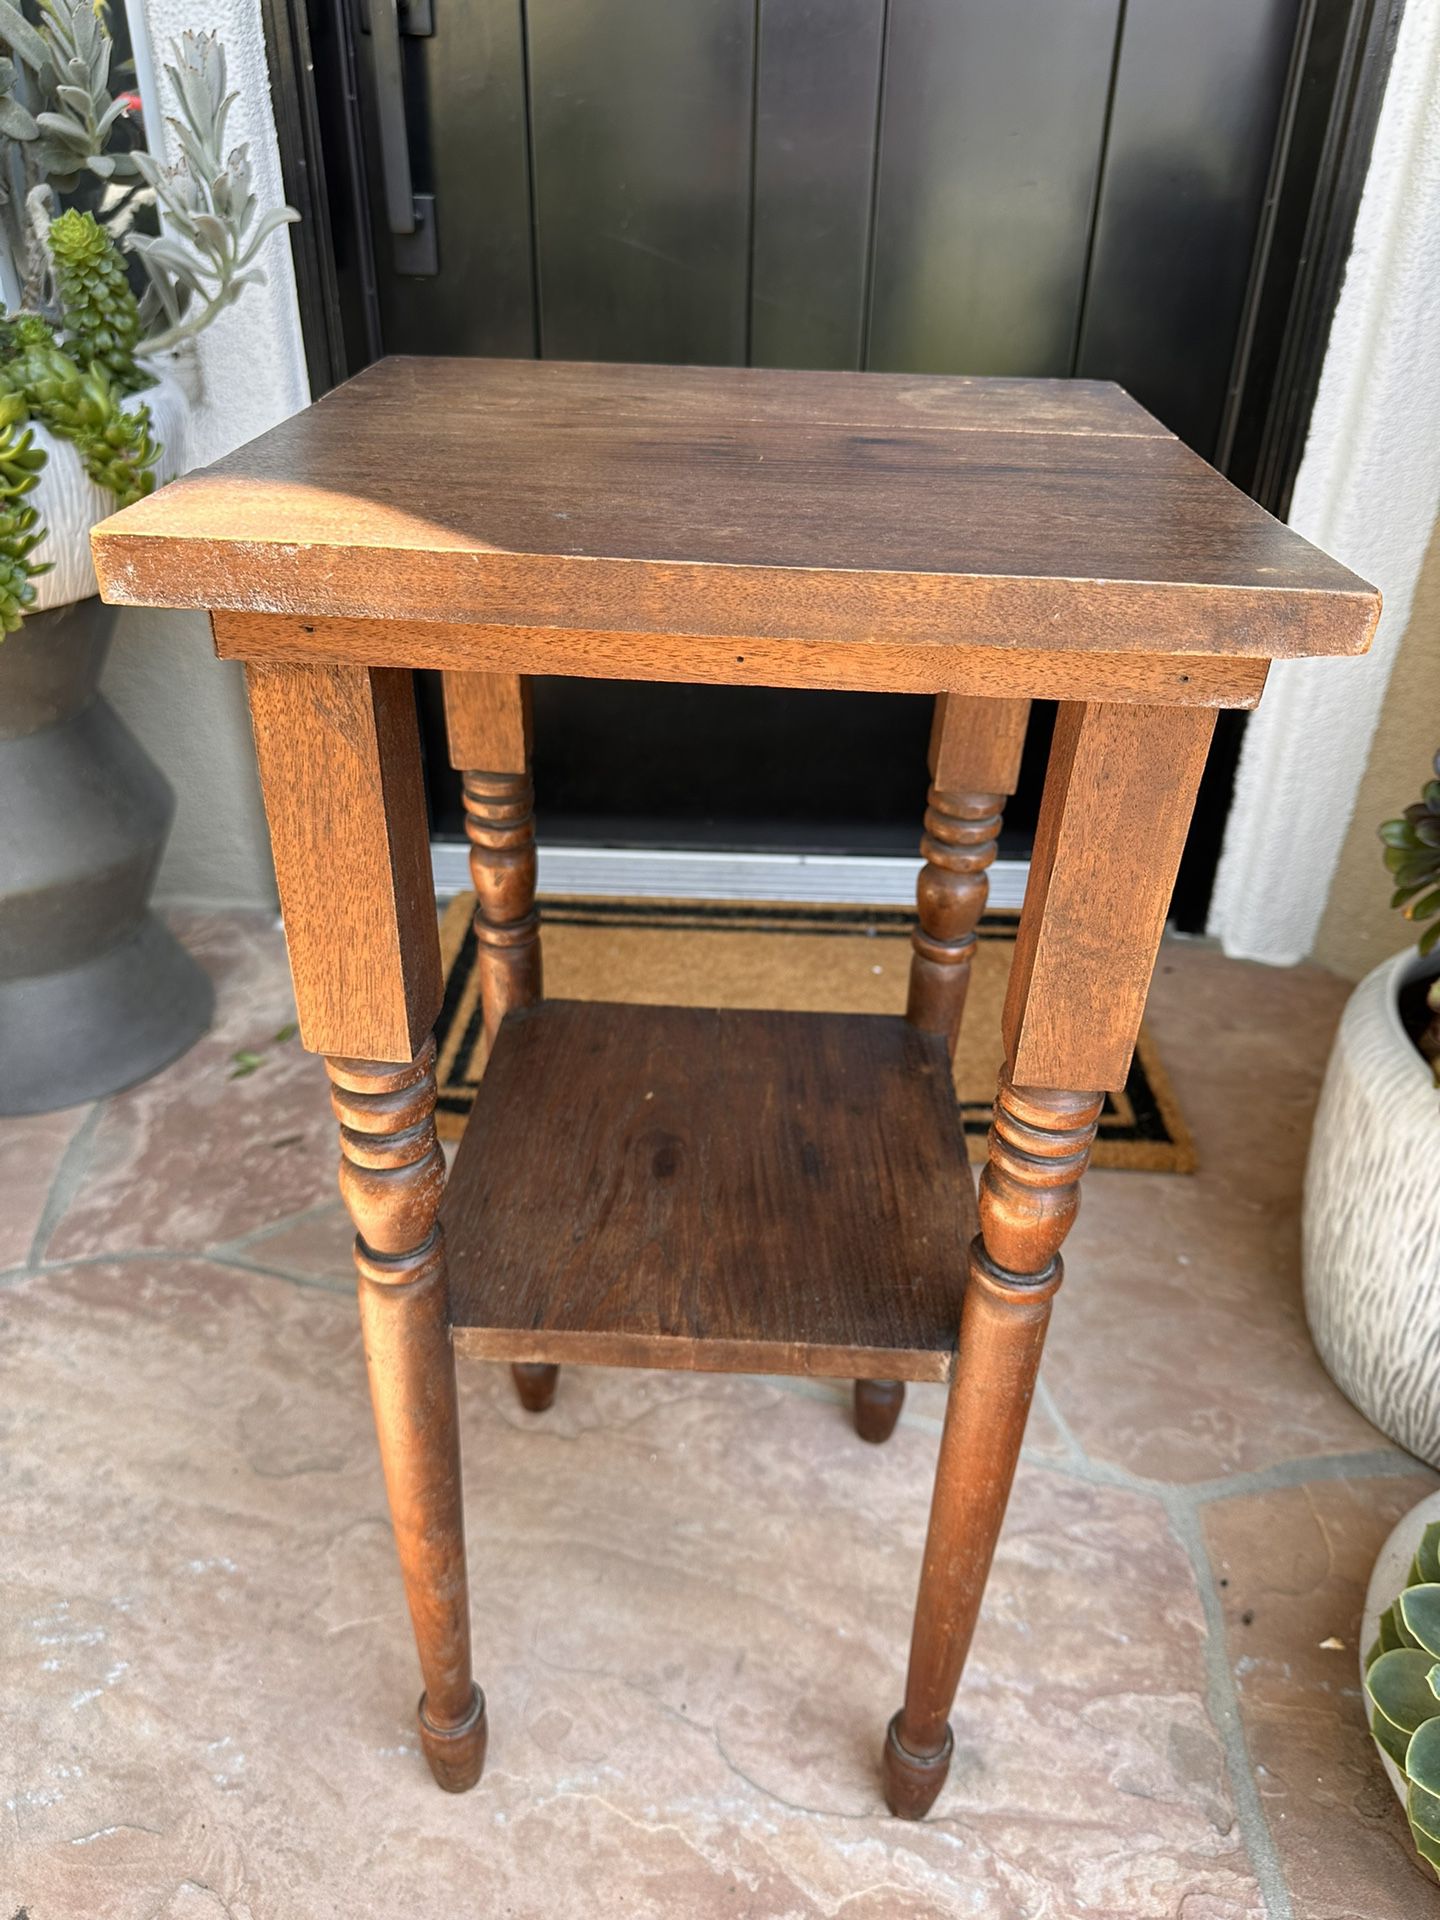 Antique Side Table - History: Hand carried aboard a ship when immigrating from England in 1900.  27.75” H x 14” W Firm Price